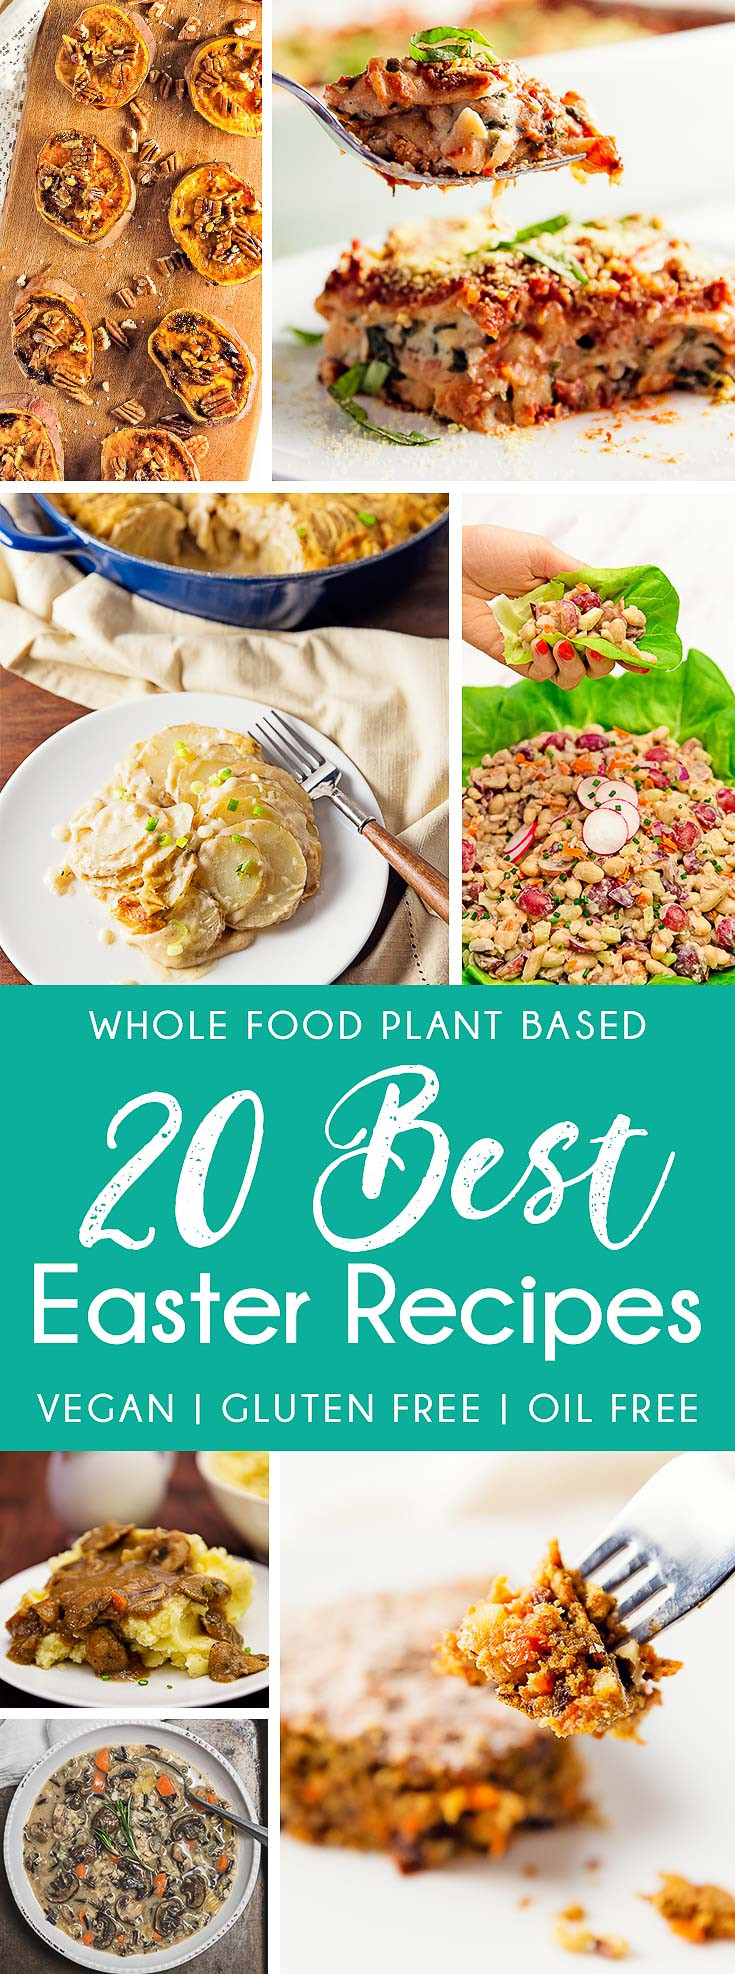 Whole Food Easter Dinner
 20 Best Easter Recipes Monkey and Me Kitchen Adventures